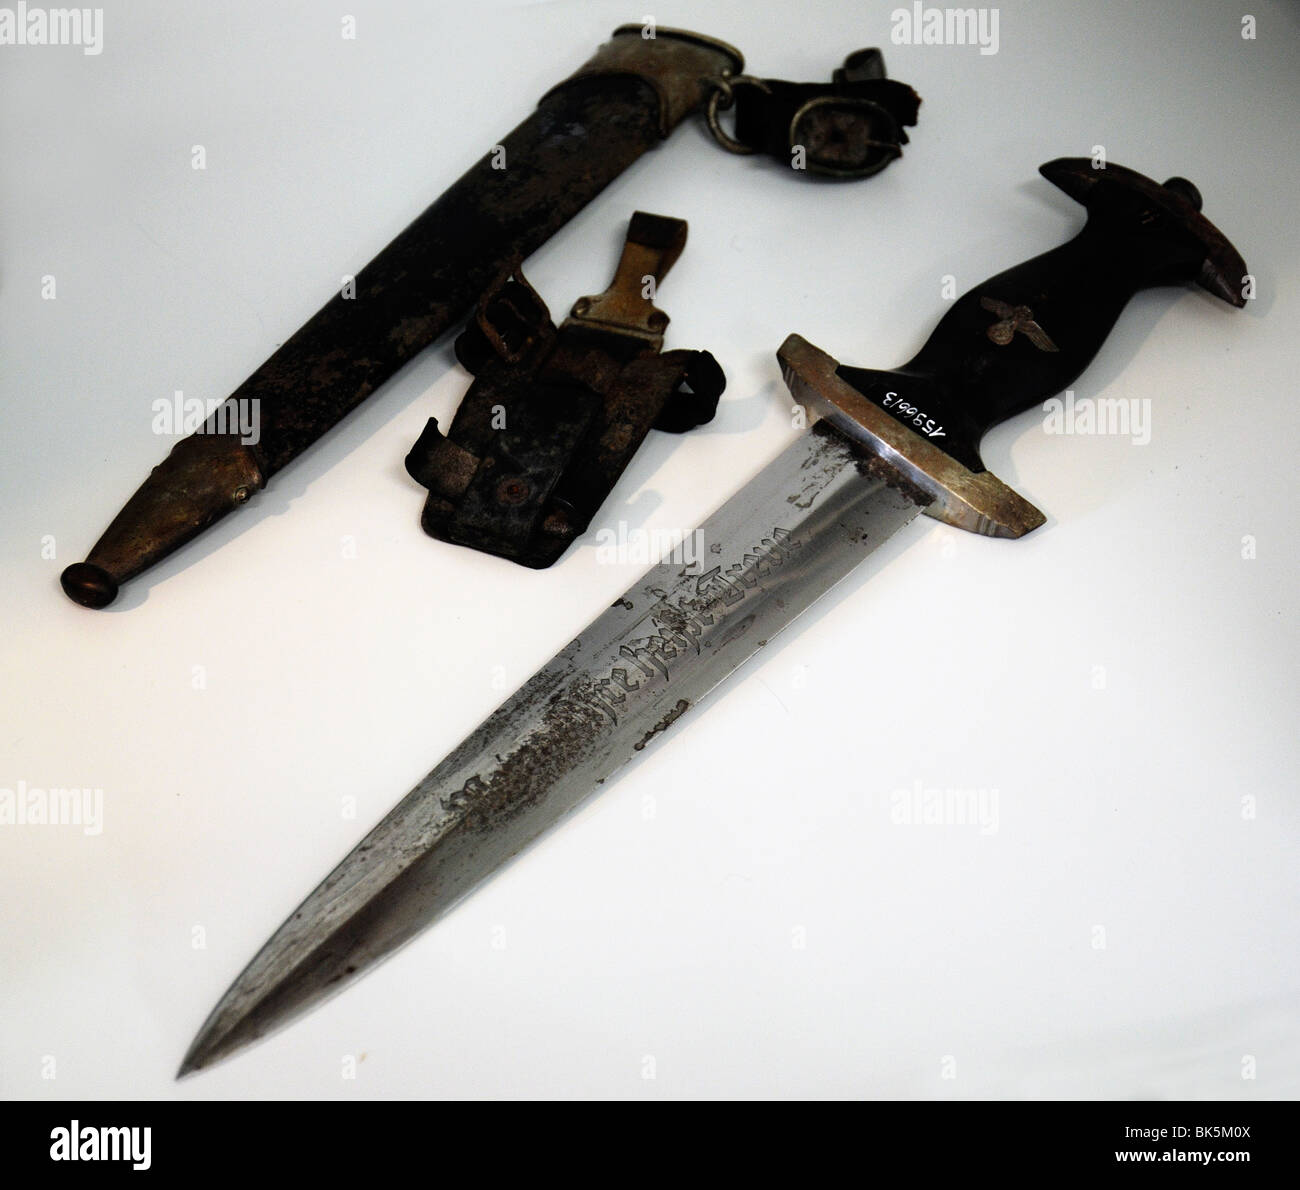 Original SS dagger with inscription My Honour is Loyalty, SS museum, Wewelsburg, Germany Stock Photo